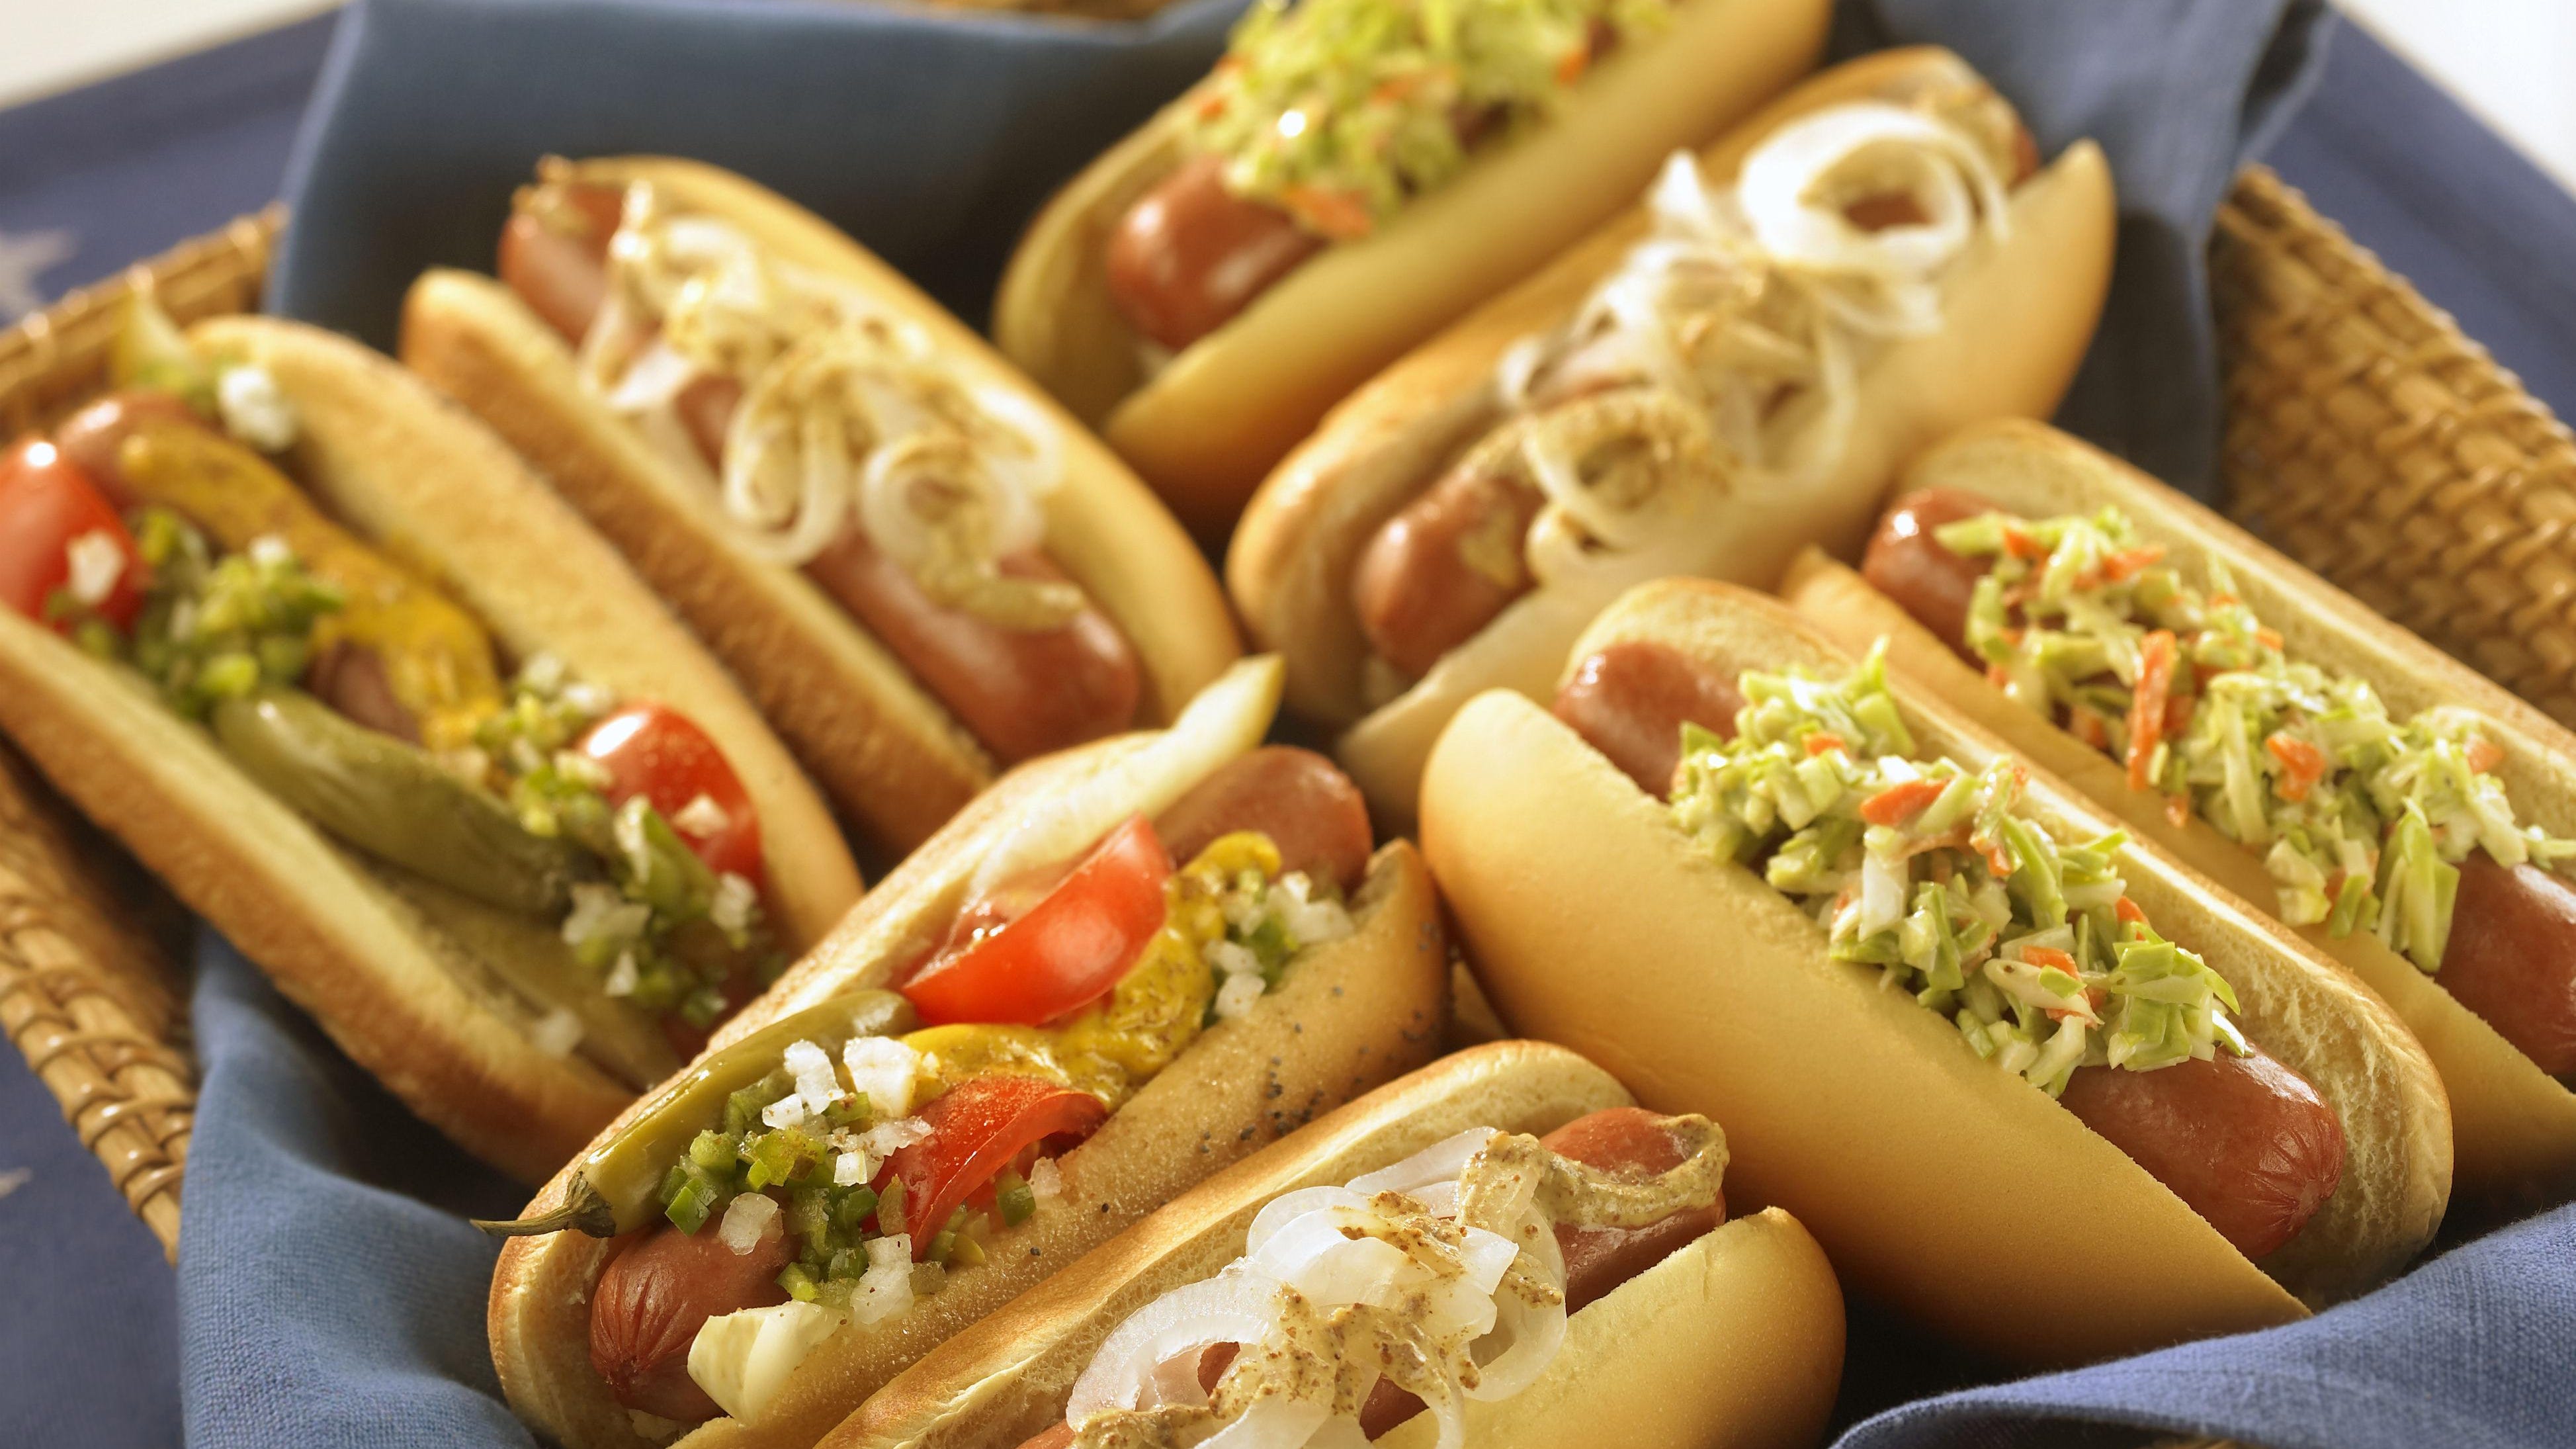 Where to find Jersey’s best hot dogs